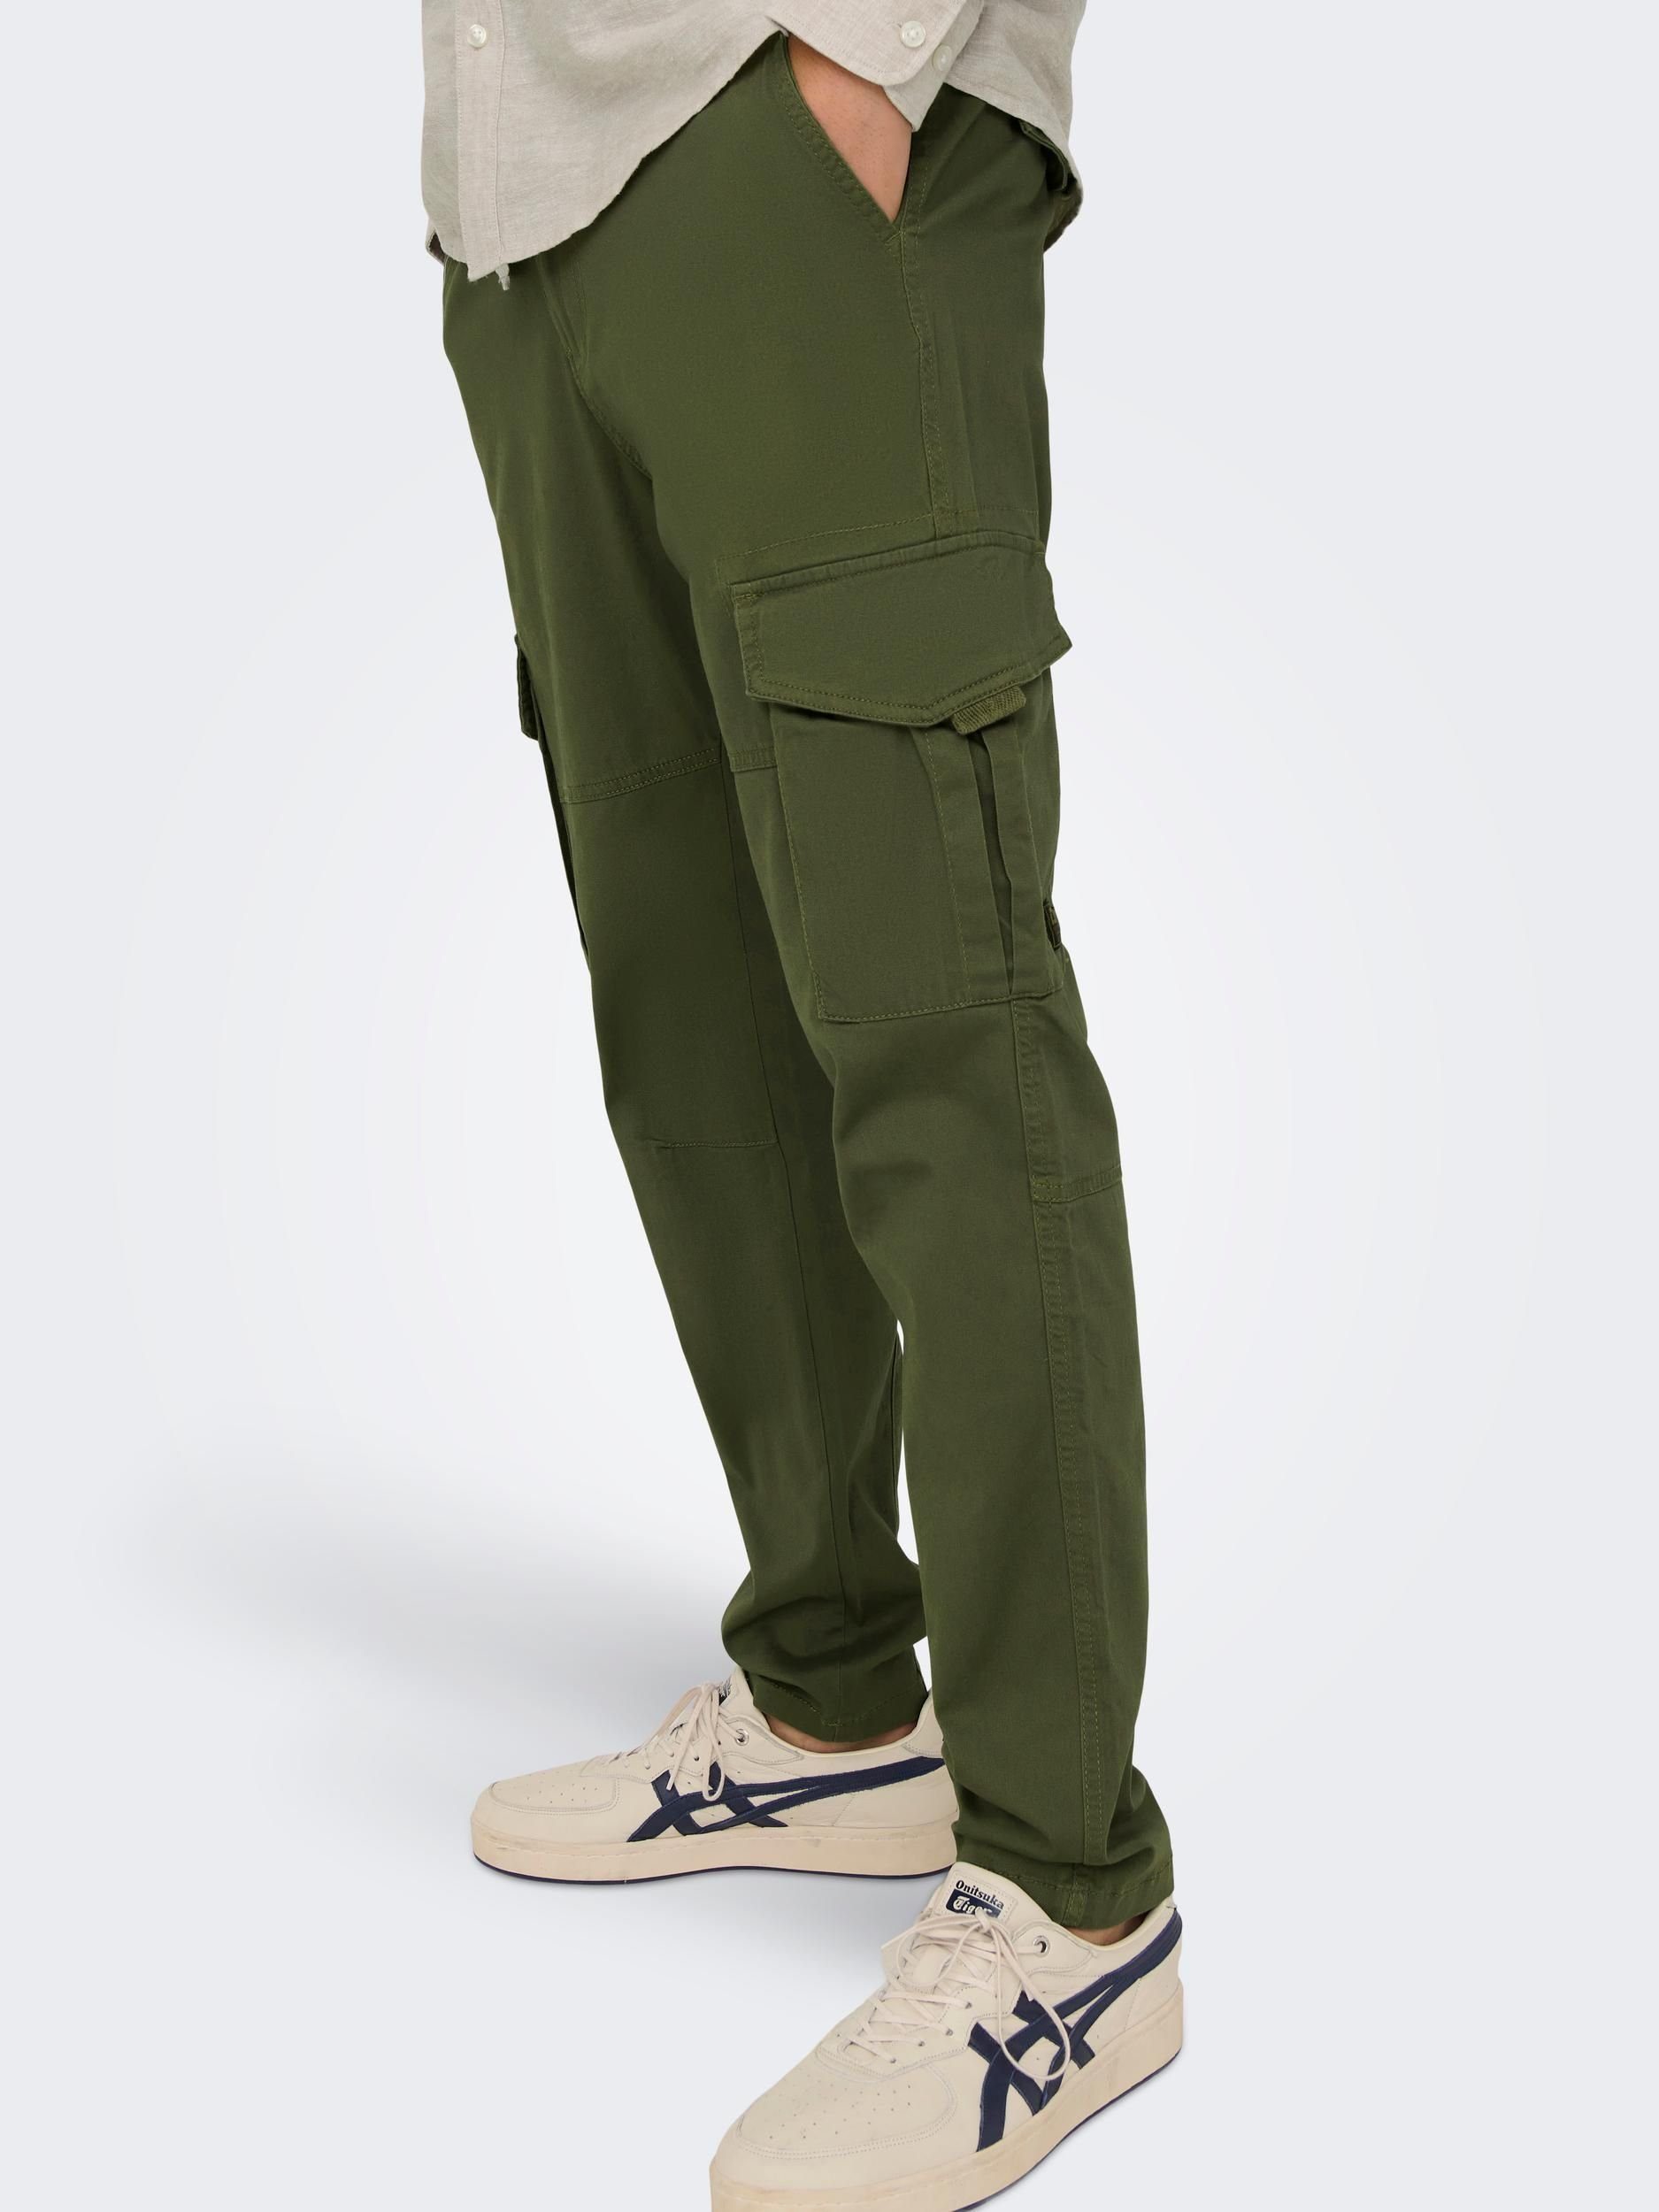 & Olive ONLY Night SONS Chinos